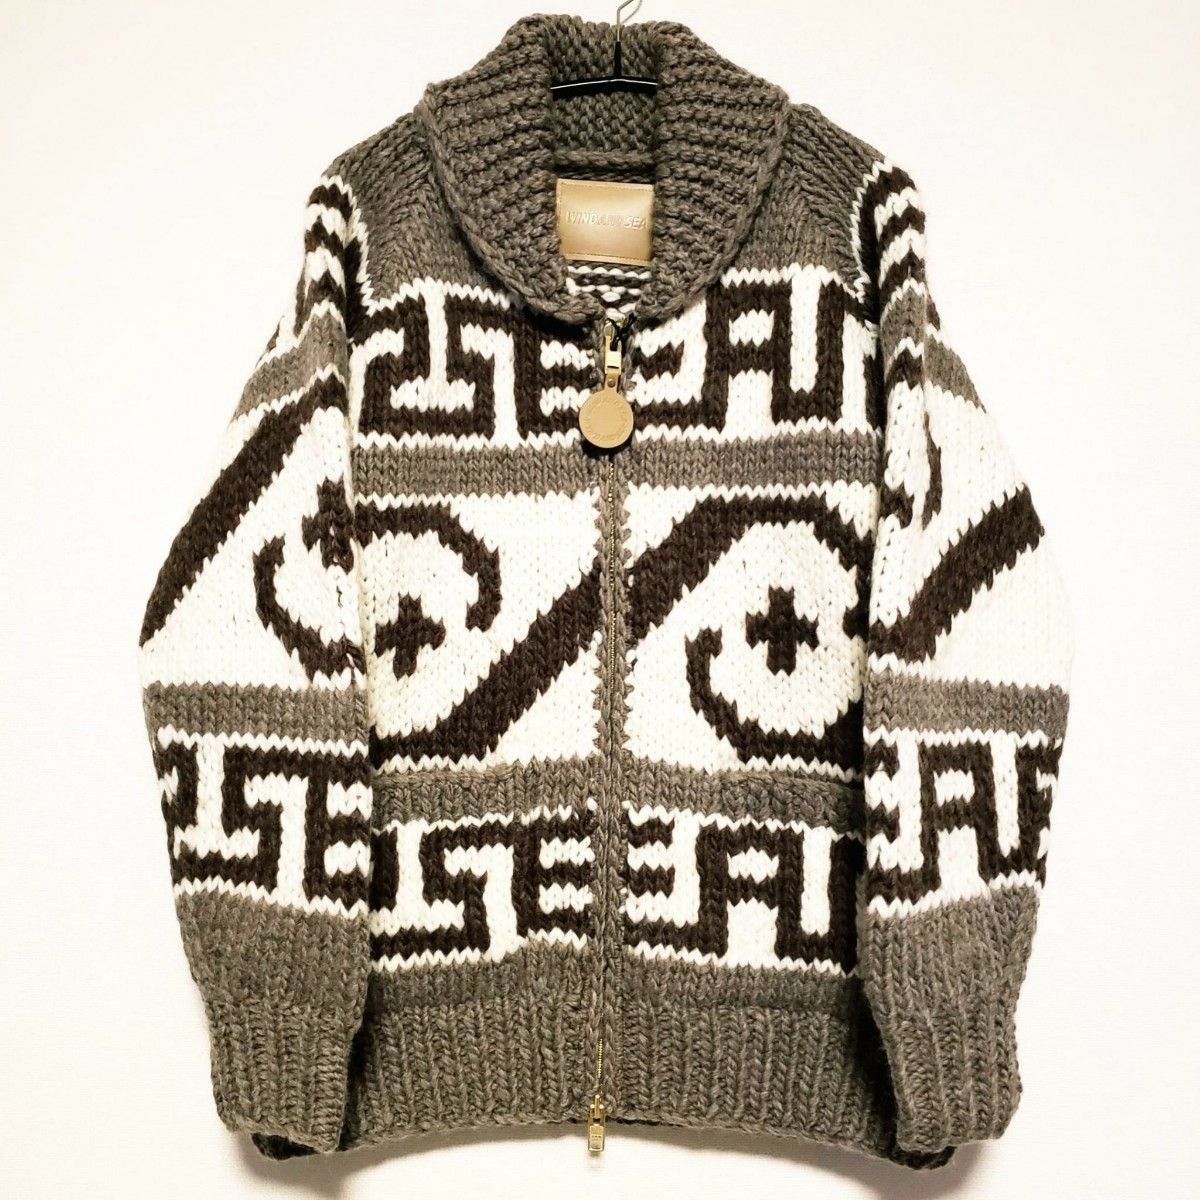 WIND AND SEA COWICHAN KNIT OUTER ウィンダンシー カウチンニット セーター キムタク 熊谷隆志